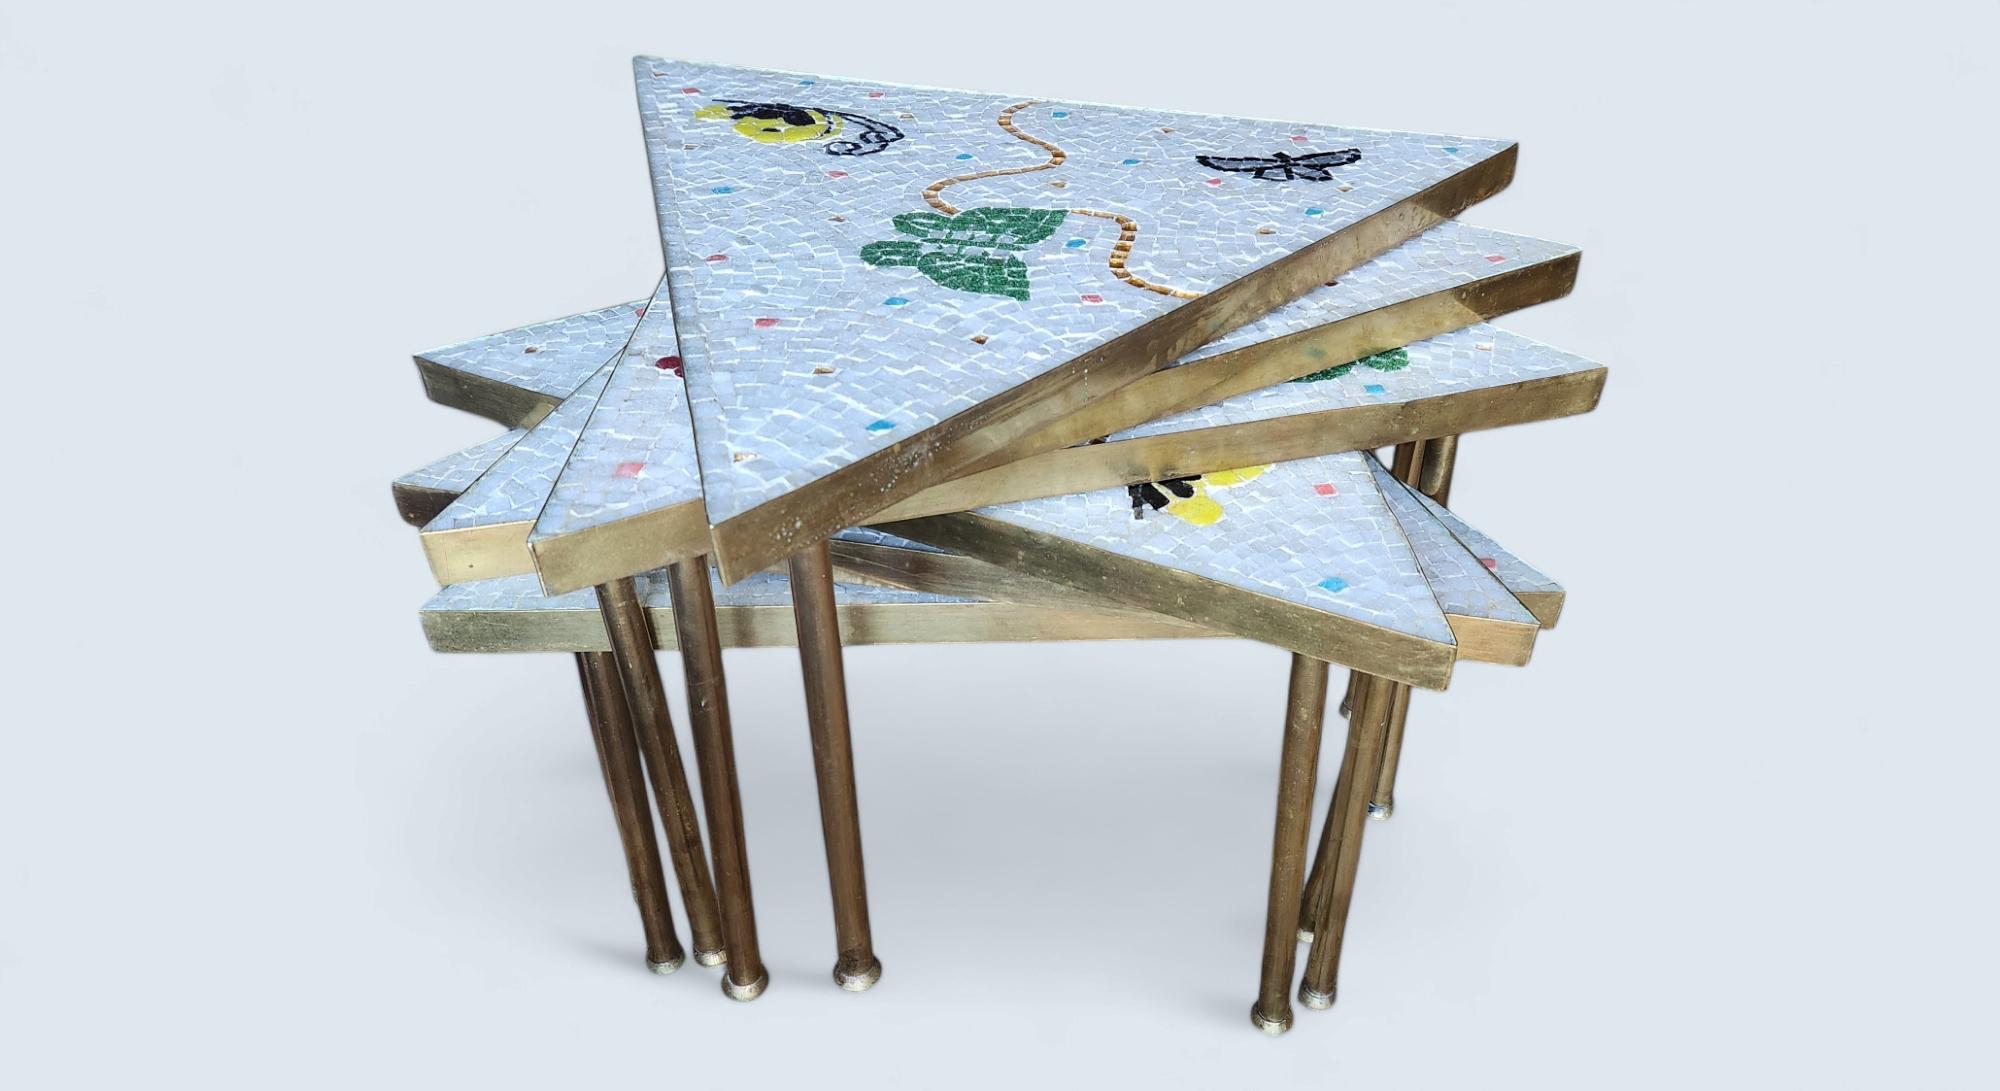 Six Piece Studio Mosaic table by Genaro Alvarez composed of intricate inlaid glass mosaic designs of 6 butterflies, on six triangular, interchangeable mahogany bases created at the Genaro Alvarez's Studio in Mexico City in the 1950s.
Alvarez a